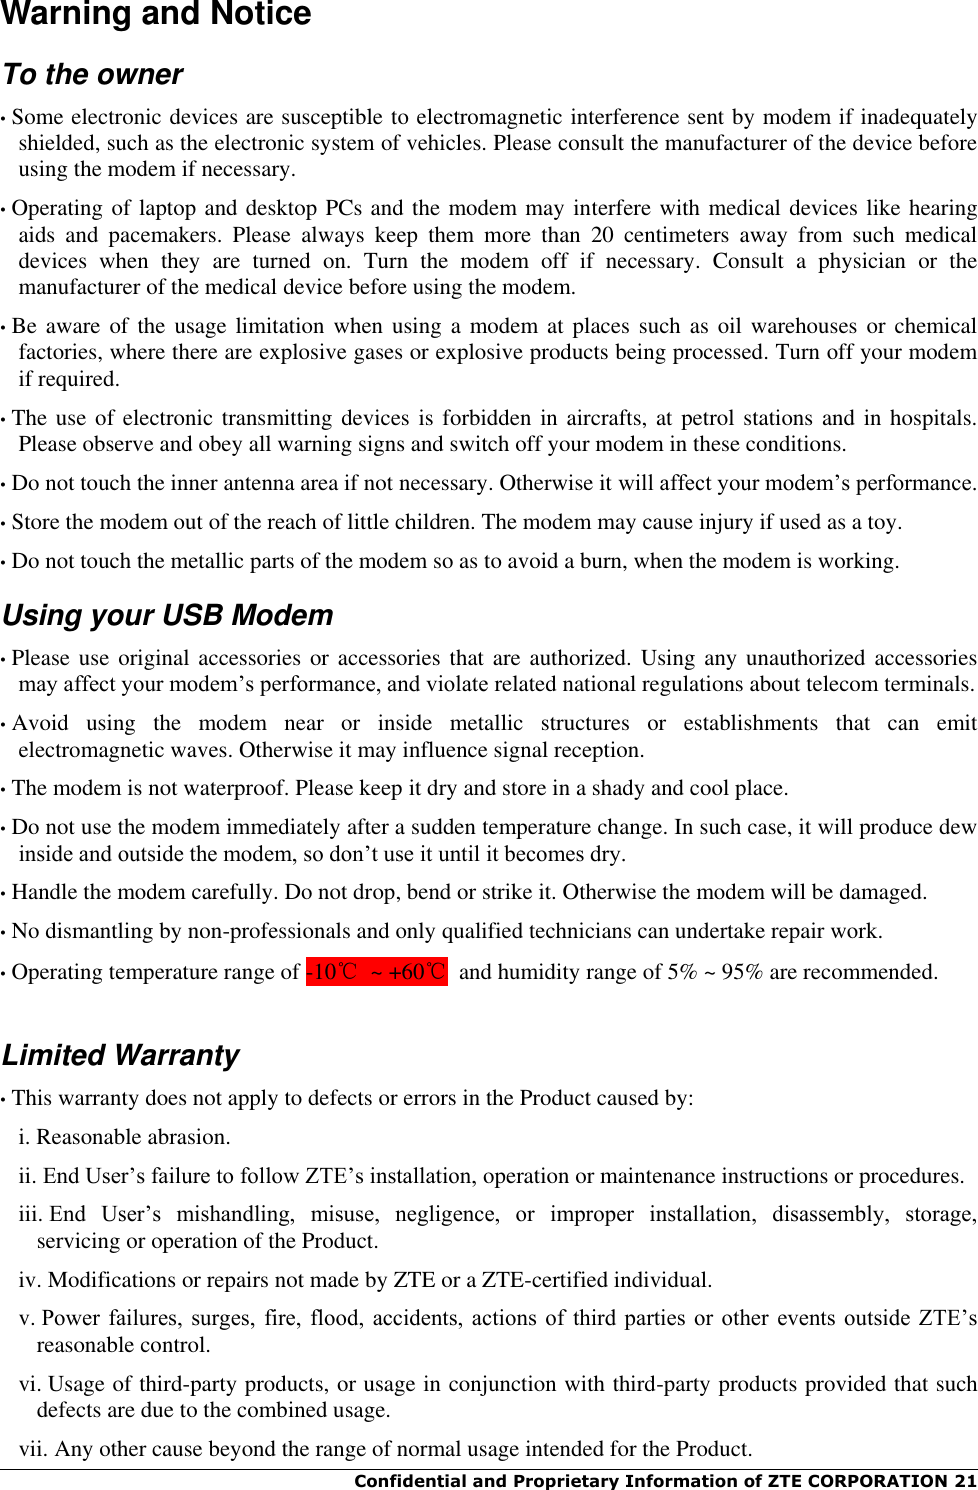  Confidential and Proprietary Information of ZTE CORPORATION 21   Warning and Notice To the owner • Some electronic devices are susceptible to electromagnetic interference sent by modem if inadequately shielded, such as the electronic system of vehicles. Please consult the manufacturer of the device before using the modem if necessary. • Operating of laptop and desktop PCs and the modem may interfere with medical devices like hearing aids  and  pacemakers.  Please  always  keep  them  more  than  20  centimeters  away  from  such  medical devices  when  they  are  turned  on.  Turn  the  modem  off  if  necessary.  Consult  a  physician  or  the manufacturer of the medical device before using the modem. • Be aware  of the  usage limitation  when  using a  modem at  places such as  oil warehouses  or chemical factories, where there are explosive gases or explosive products being processed. Turn off your modem if required. • The use of electronic transmitting devices is forbidden  in aircrafts, at petrol stations and in hospitals. Please observe and obey all warning signs and switch off your modem in these conditions. • Do not touch the inner antenna area if not necessary. Otherwise it will affect your modem’s performance. • Store the modem out of the reach of little children. The modem may cause injury if used as a toy. • Do not touch the metallic parts of the modem so as to avoid a burn, when the modem is working. Using your USB Modem • Please use original accessories or accessories  that are authorized. Using any  unauthorized accessories may affect your modem’s performance, and violate related national regulations about telecom terminals. • Avoid  using  the  modem  near  or  inside  metallic  structures  or  establishments  that  can  emit electromagnetic waves. Otherwise it may influence signal reception. • The modem is not waterproof. Please keep it dry and store in a shady and cool place. • Do not use the modem immediately after a sudden temperature change. In such case, it will produce dew inside and outside the modem, so don’t use it until it becomes dry. • Handle the modem carefully. Do not drop, bend or strike it. Otherwise the modem will be damaged. • No dismantling by non-professionals and only qualified technicians can undertake repair work. • Operating temperature range of -10℃  ~ +60℃  and humidity range of 5% ~ 95% are recommended.  Limited Warranty • This warranty does not apply to defects or errors in the Product caused by: i. Reasonable abrasion. ii. End User’s failure to follow ZTE’s installation, operation or maintenance instructions or procedures. iii. End  User’s  mishandling,  misuse,  negligence,  or  improper  installation,  disassembly,  storage, servicing or operation of the Product. iv. Modifications or repairs not made by ZTE or a ZTE-certified individual. v. Power  failures,  surges,  fire,  flood,  accidents,  actions  of  third  parties  or  other  events  outside  ZTE’s reasonable control. vi. Usage of third-party products, or usage in conjunction with third-party products provided that such defects are due to the combined usage. vii. Any other cause beyond the range of normal usage intended for the Product. 